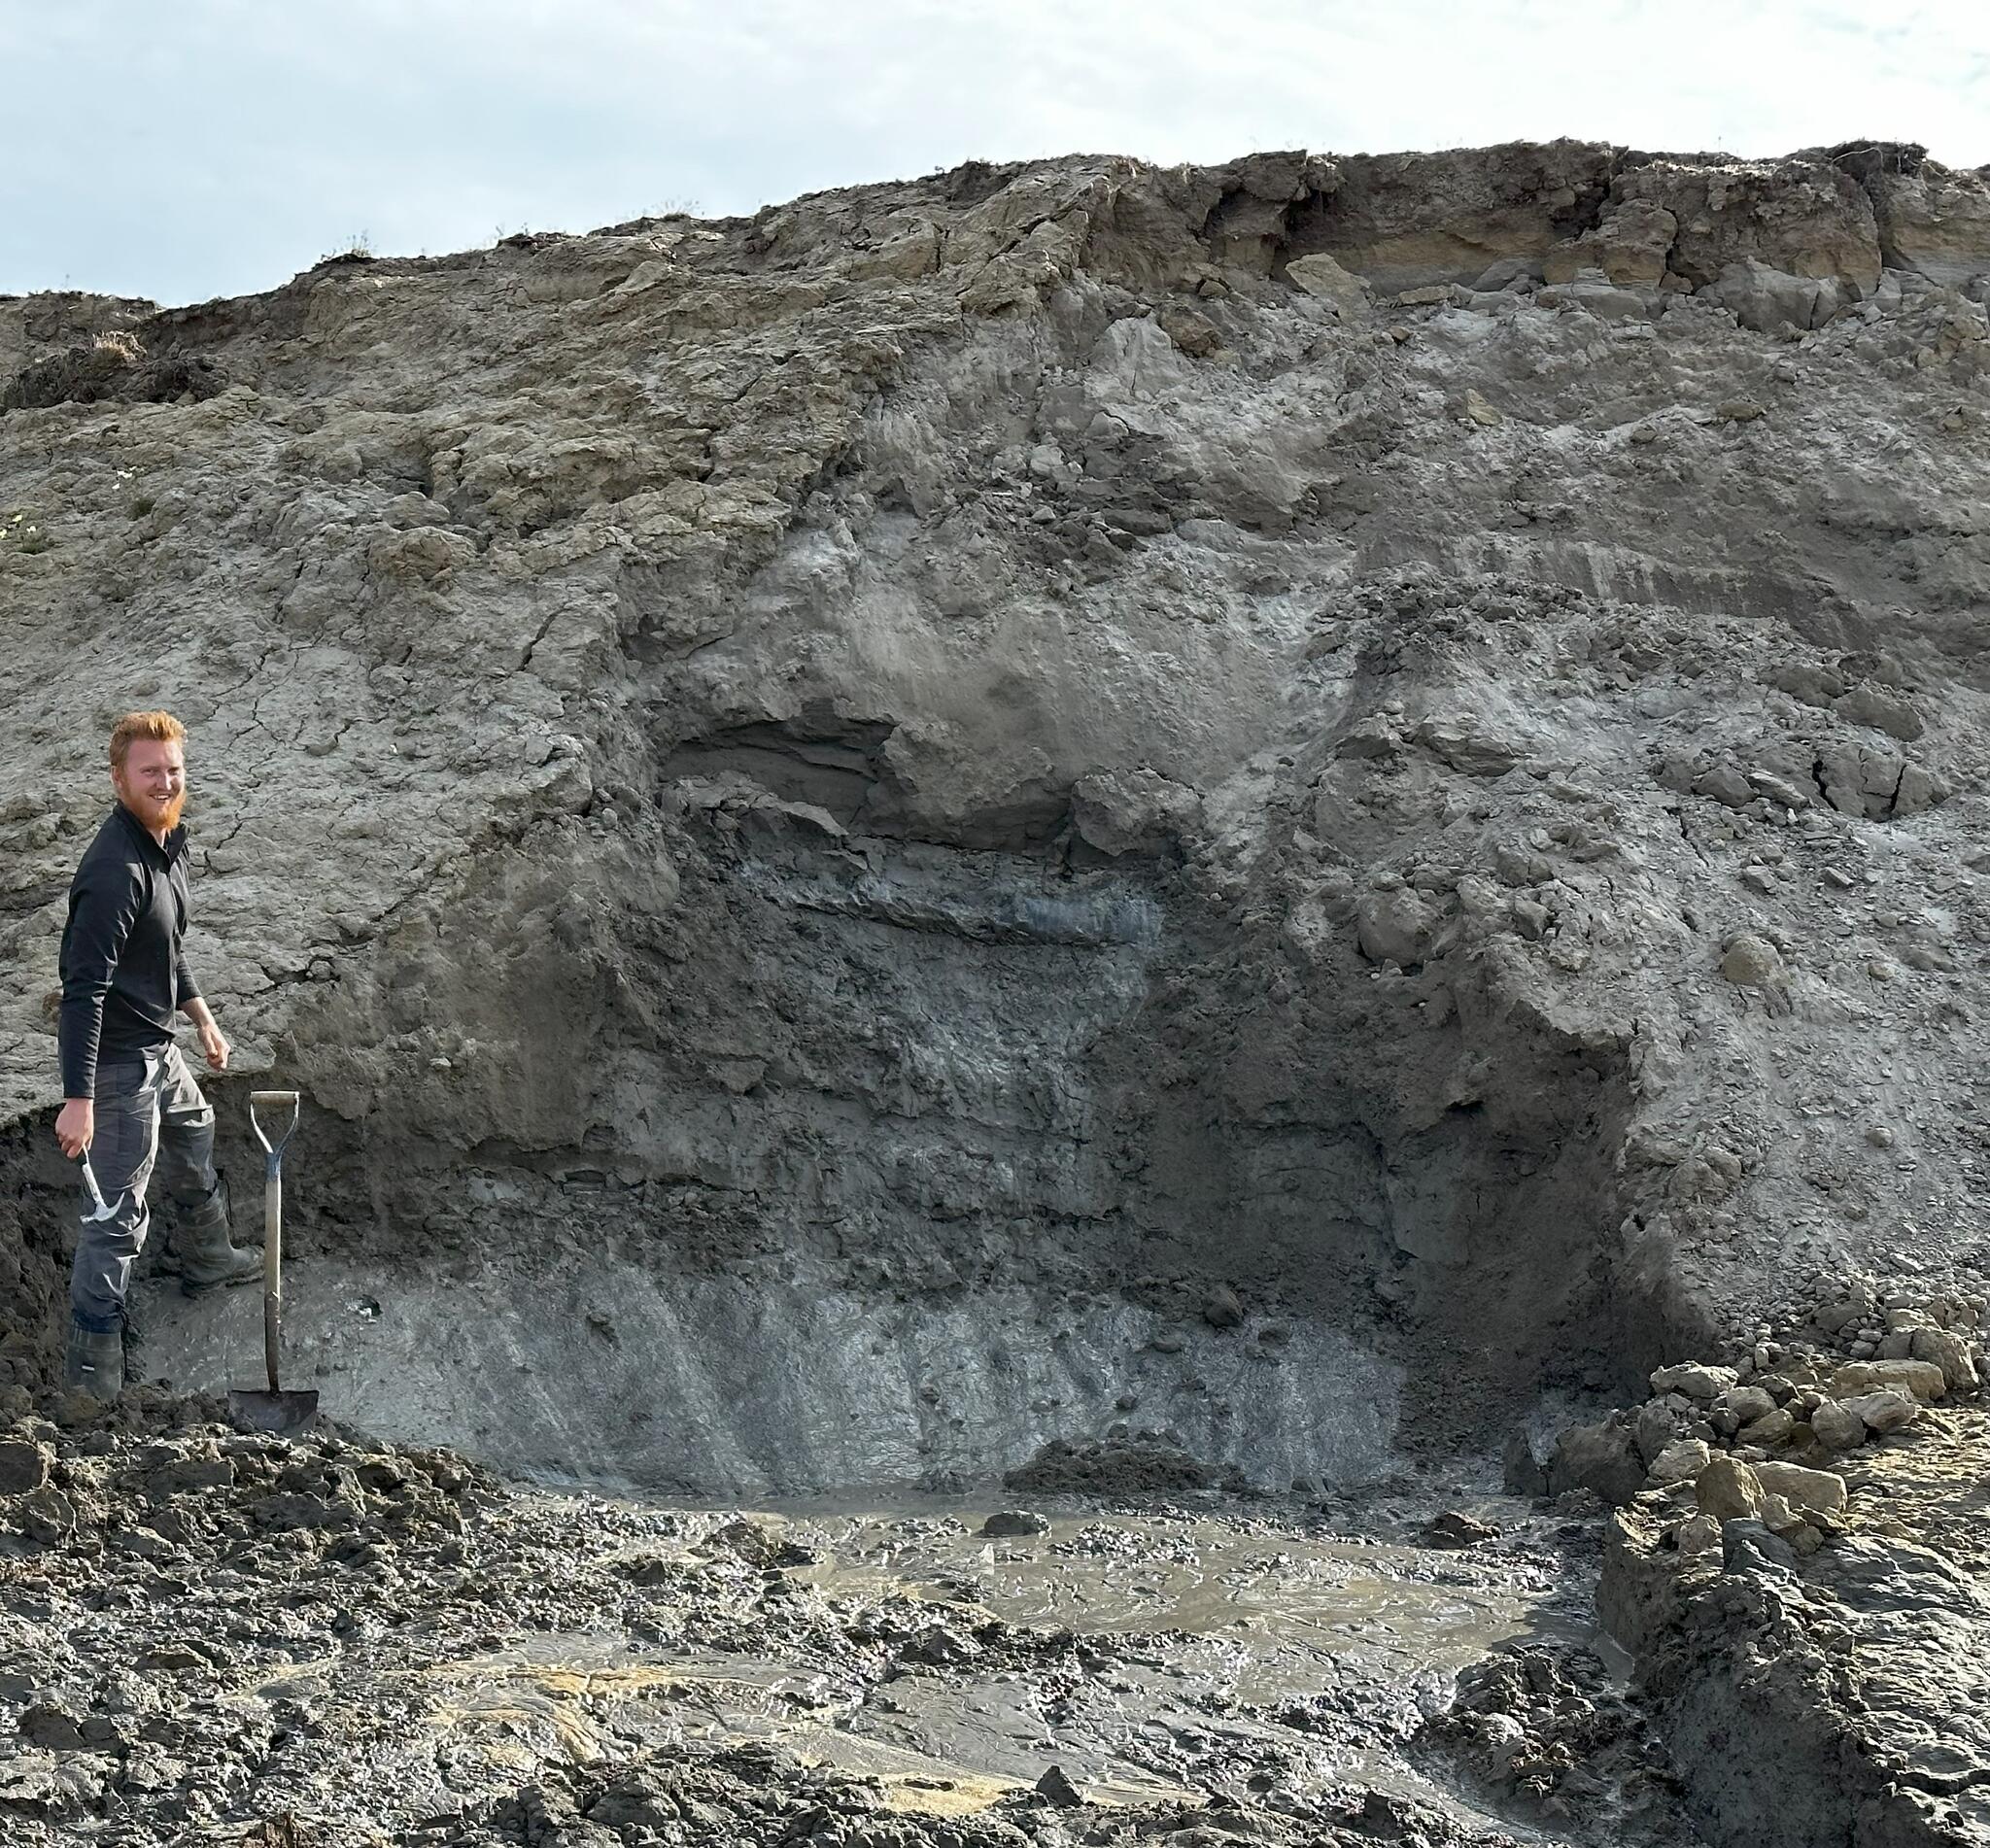 Sam stands in front of a slab of gray rock, wearing a black shirt and gray pants, holding a hammer in one hand and a shovel in the other.